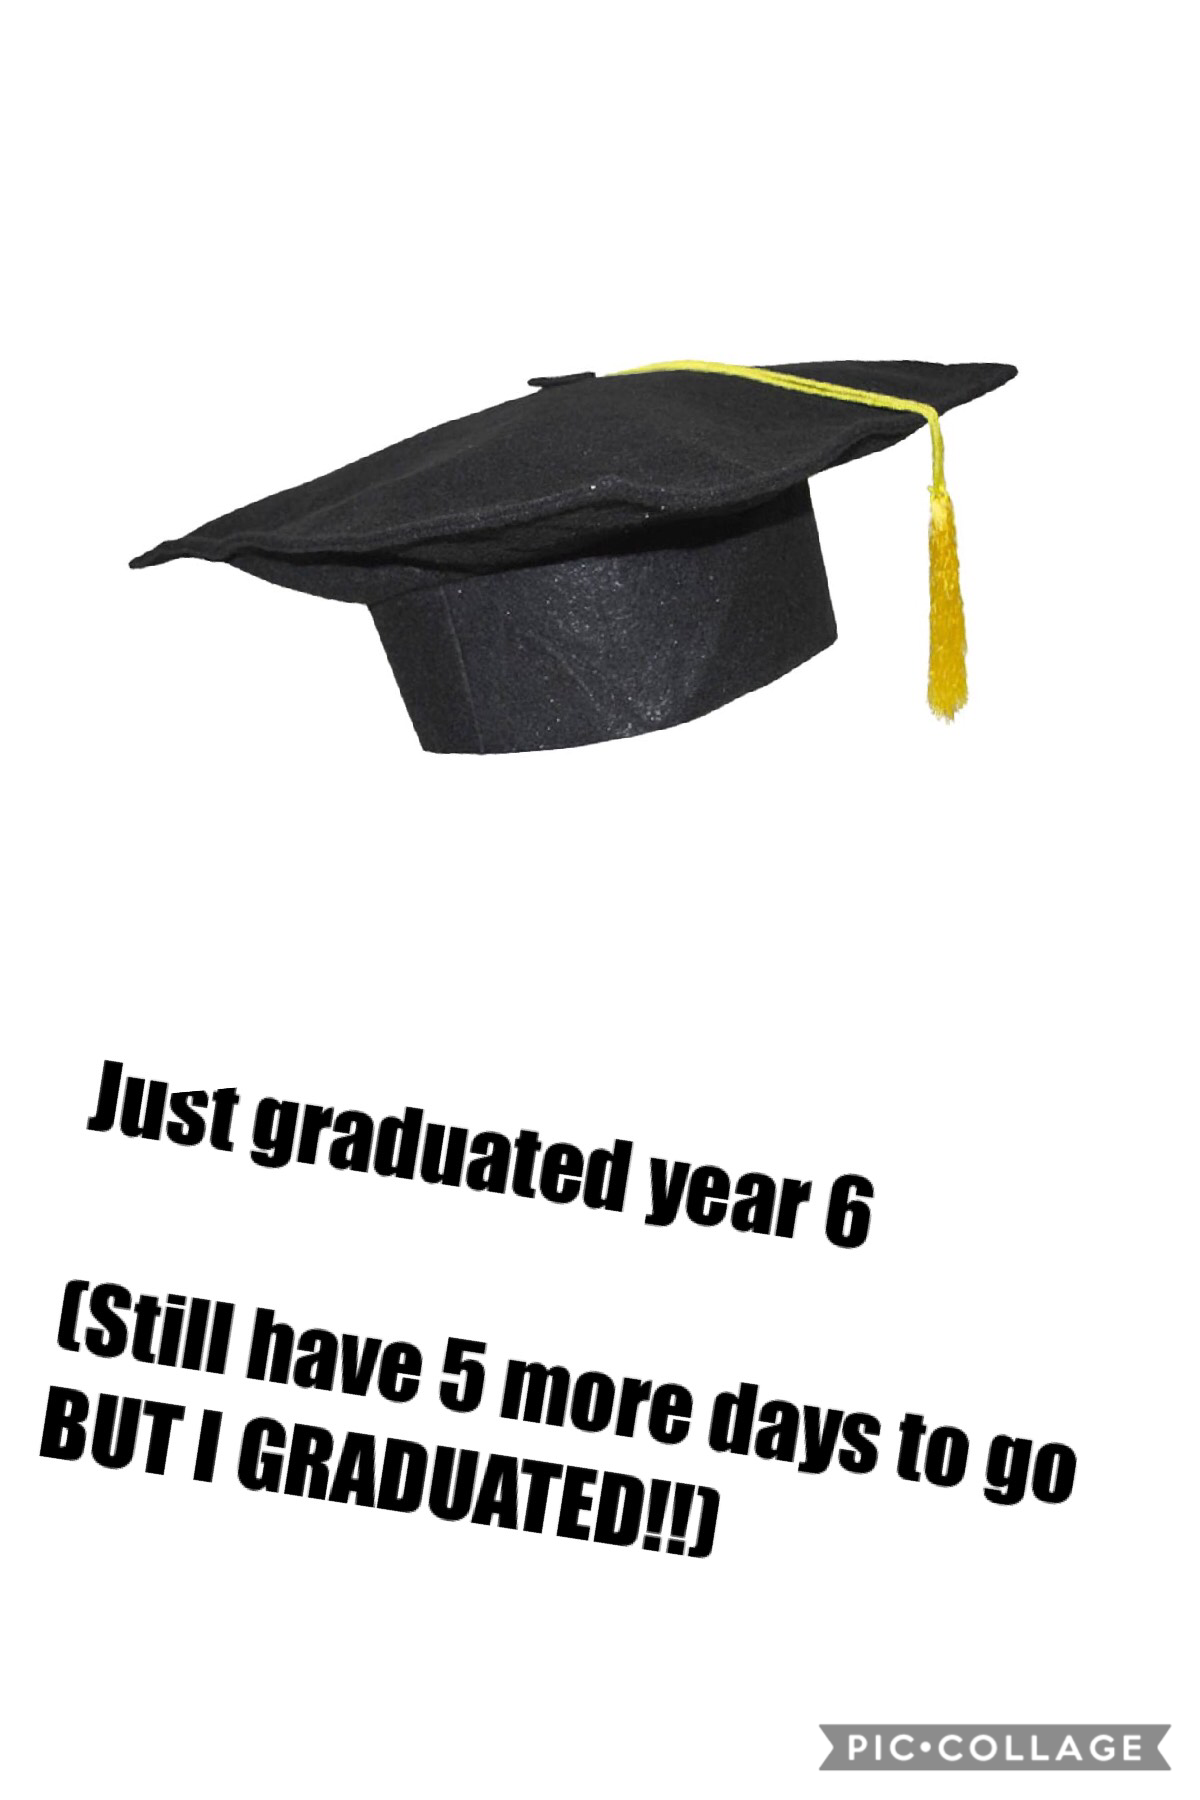 JUST GRADUATED YEAR 7 NEXT YEAR